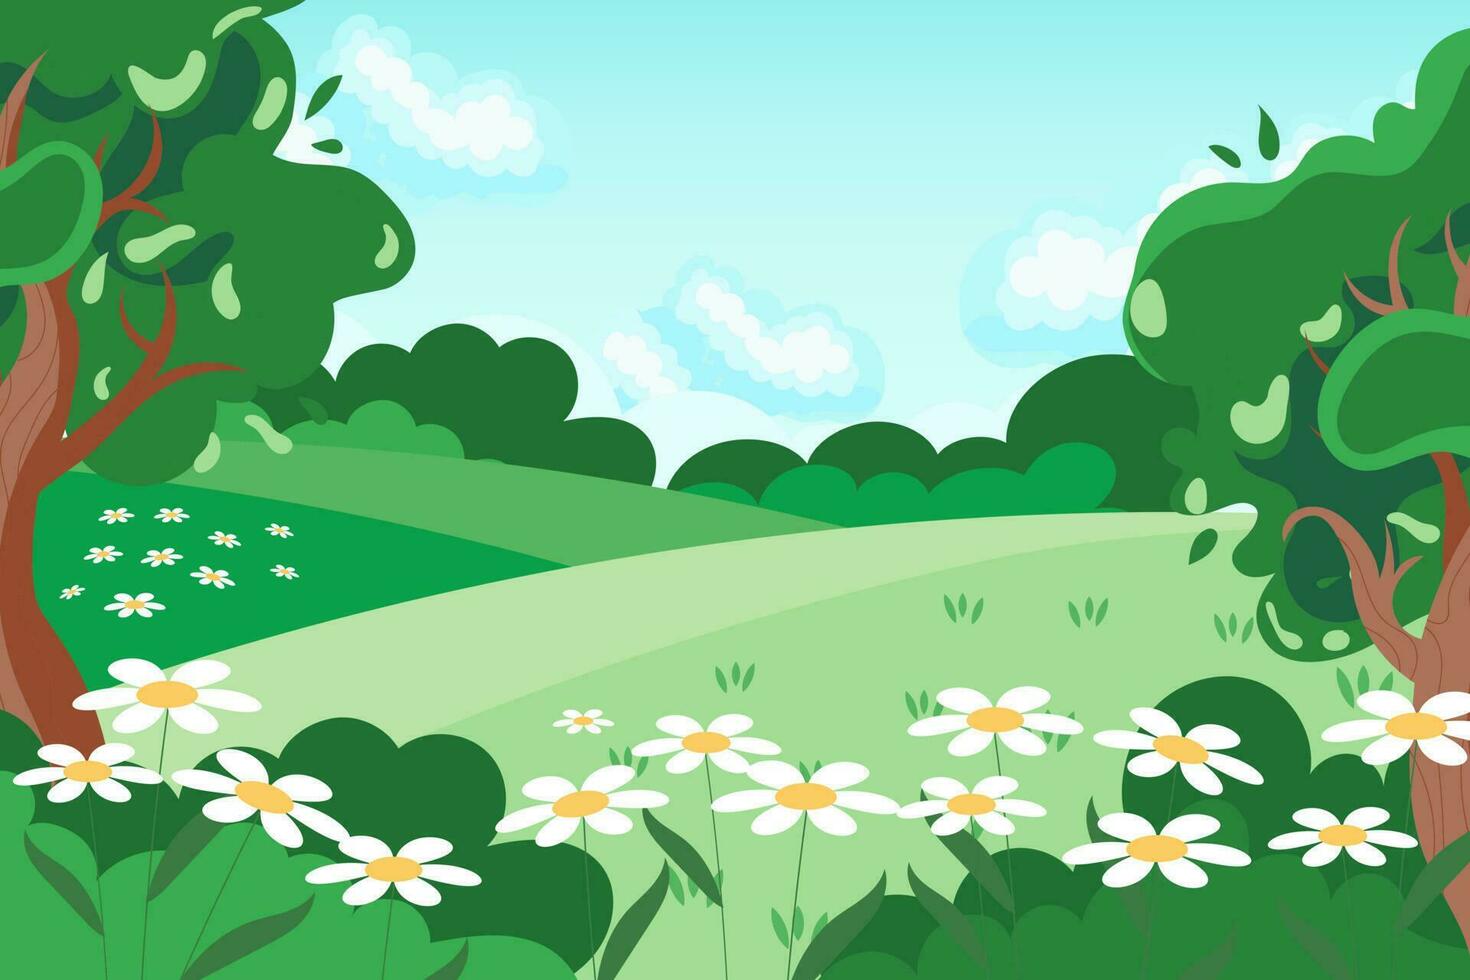 Spring-summer landscape, chamomile meadows and trees against the sky with clouds. Illustration, background, vector